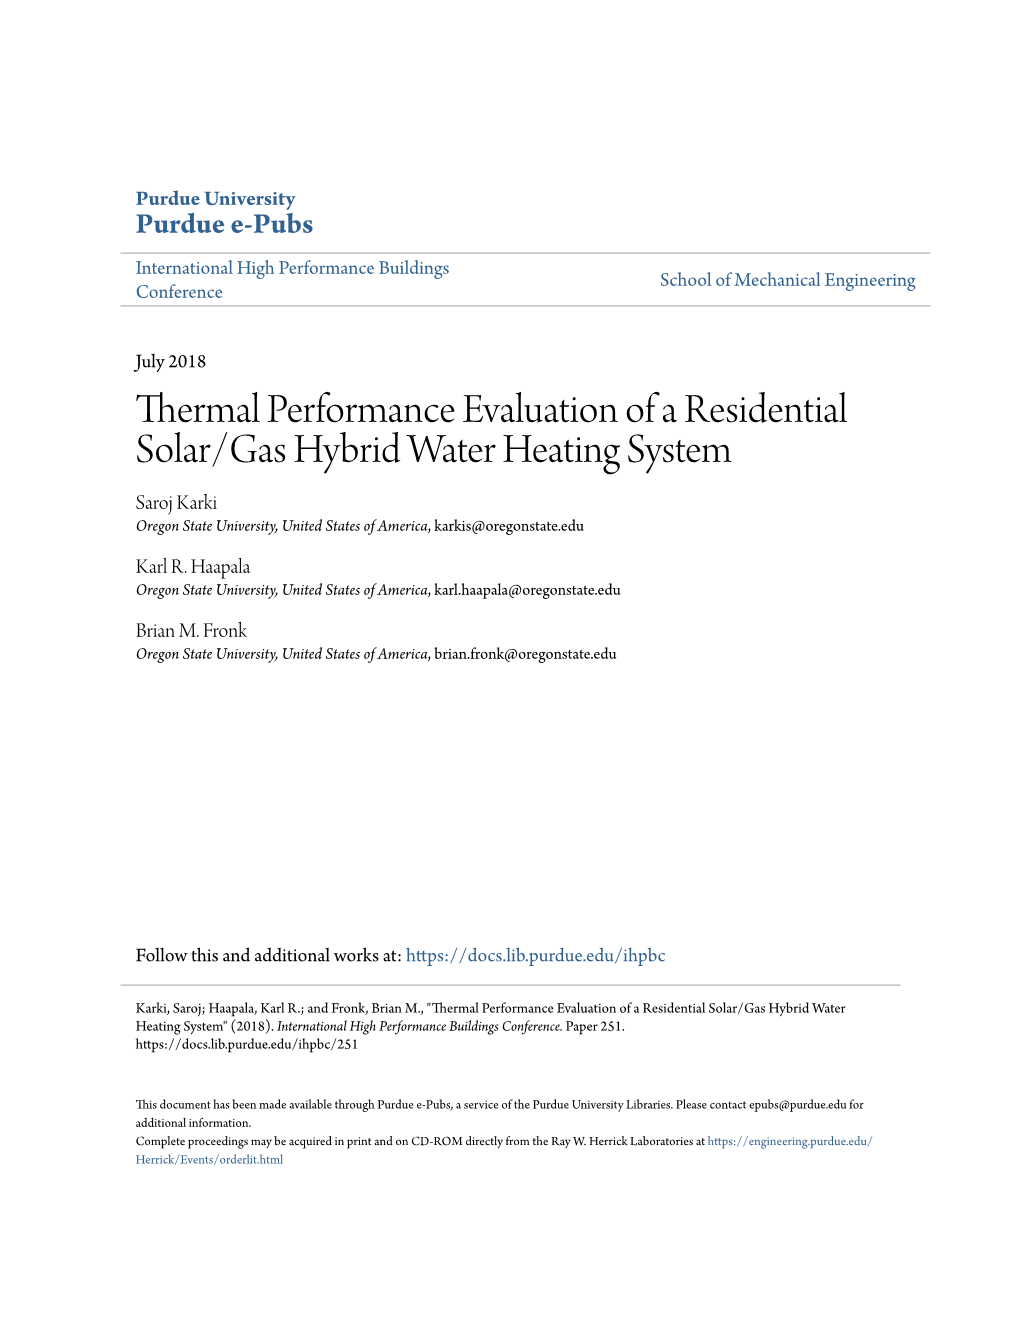 Thermal Performance Evaluation of a Residential Solar/Gas Hybrid Water Heating System